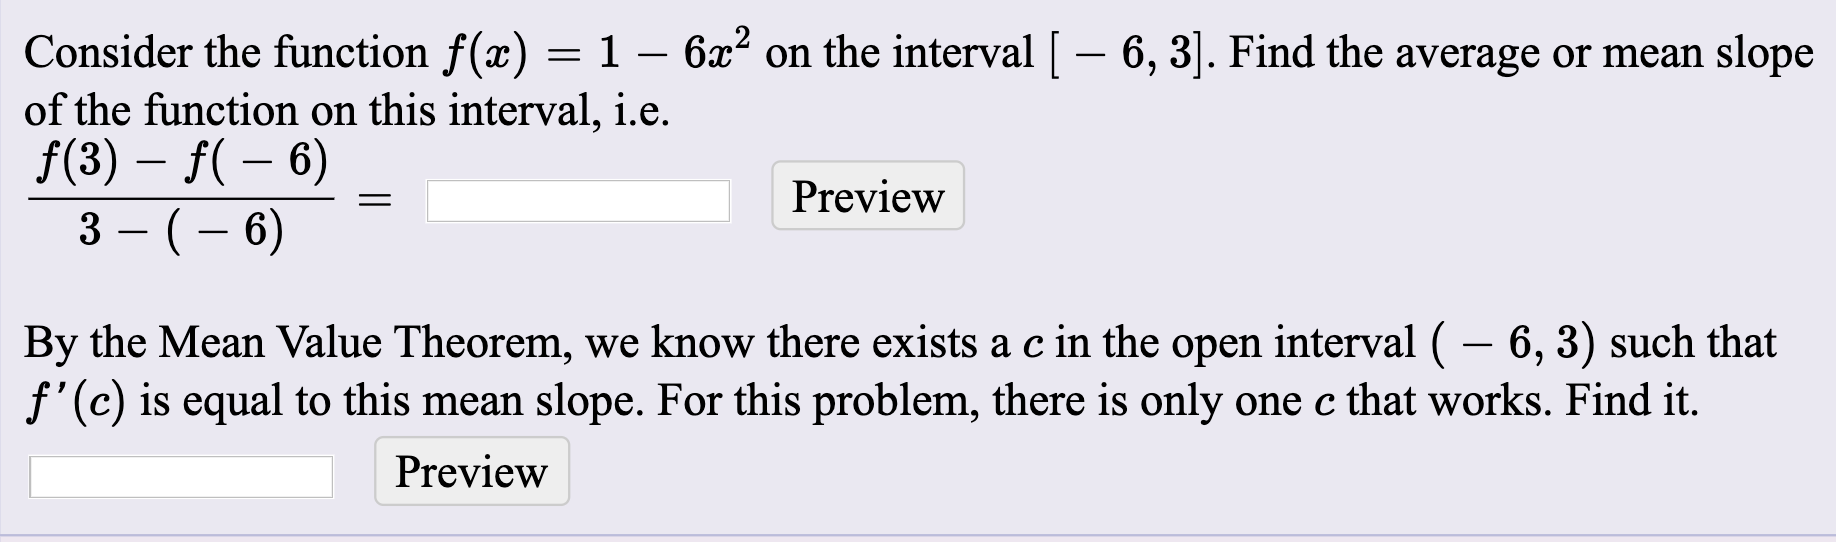 Consider the function f(x) = 1 – 6x² on the interval - 6, 3]. Find the average or mean slope
of the function on this interval, i.e.
f(3) – f( – 6)
3 - (– 6)
Preview
By the Mean Value Theorem, we know there exists a c in the open interval (– 6, 3) such that
f'(c) is equal to this mean slope. For this problem, there is only one c that works. Find it.
Preview
